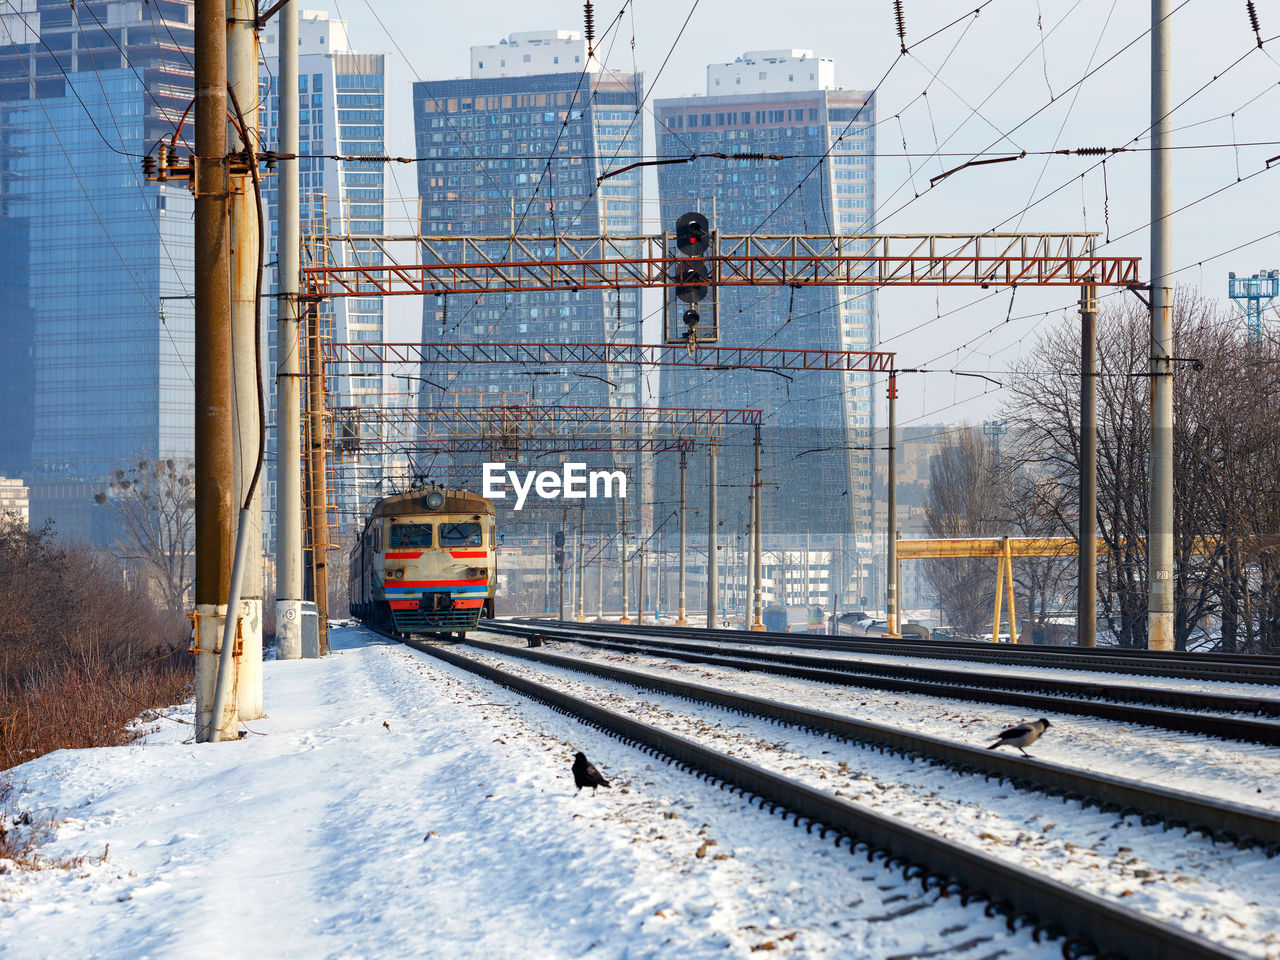 An old electric train moves on rails in the winter season against the backdrop of a cityscape.